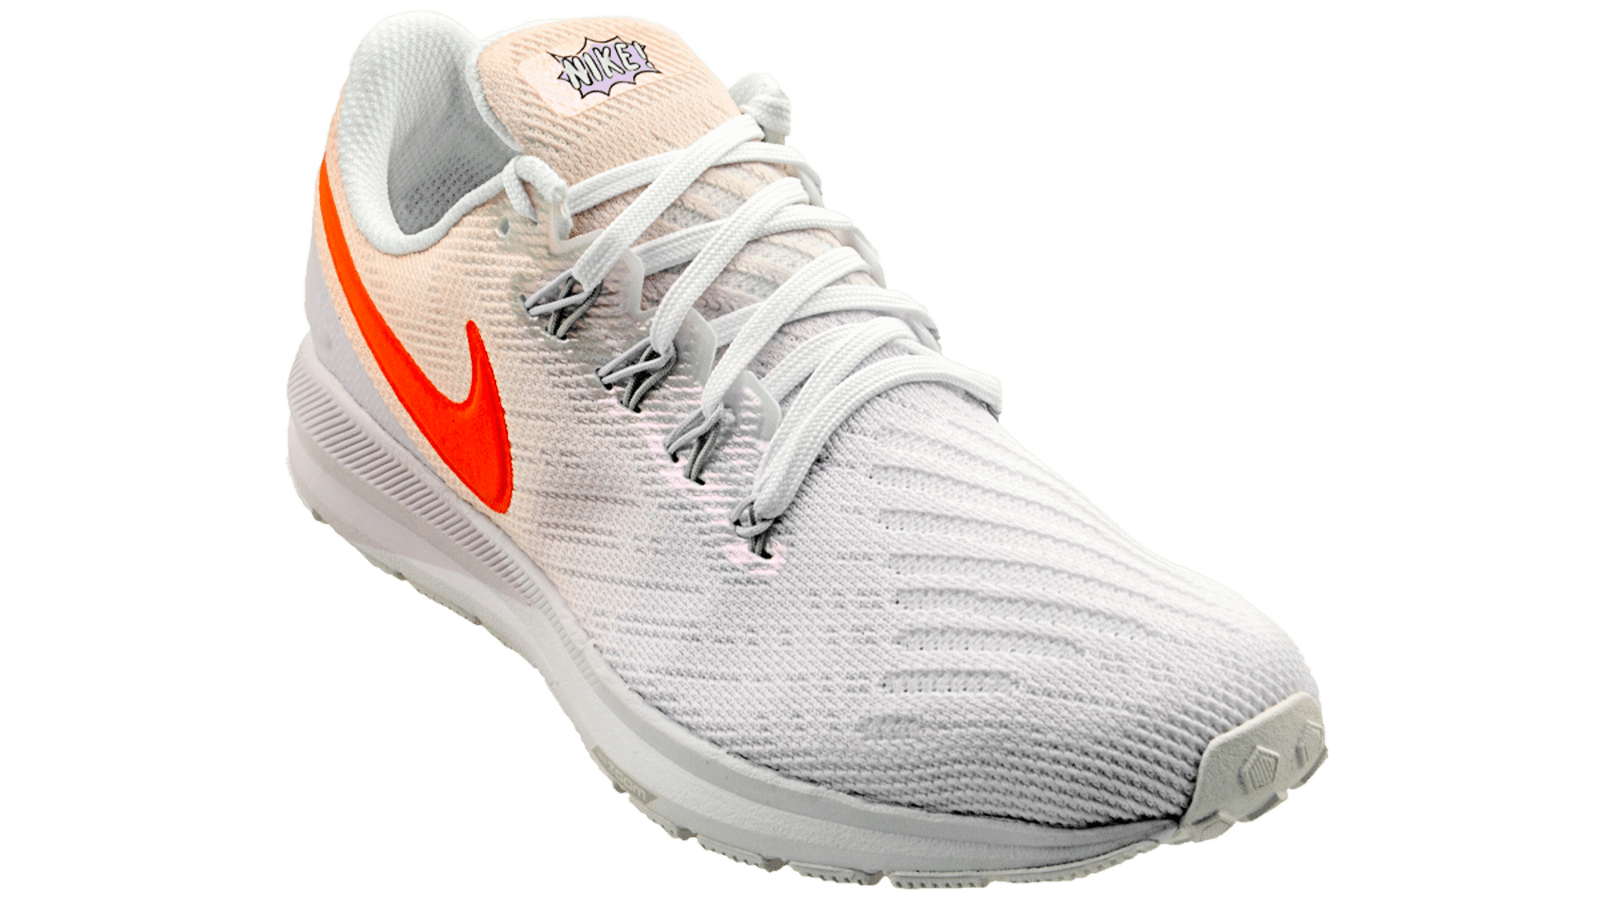 women's nike zoom structure 22